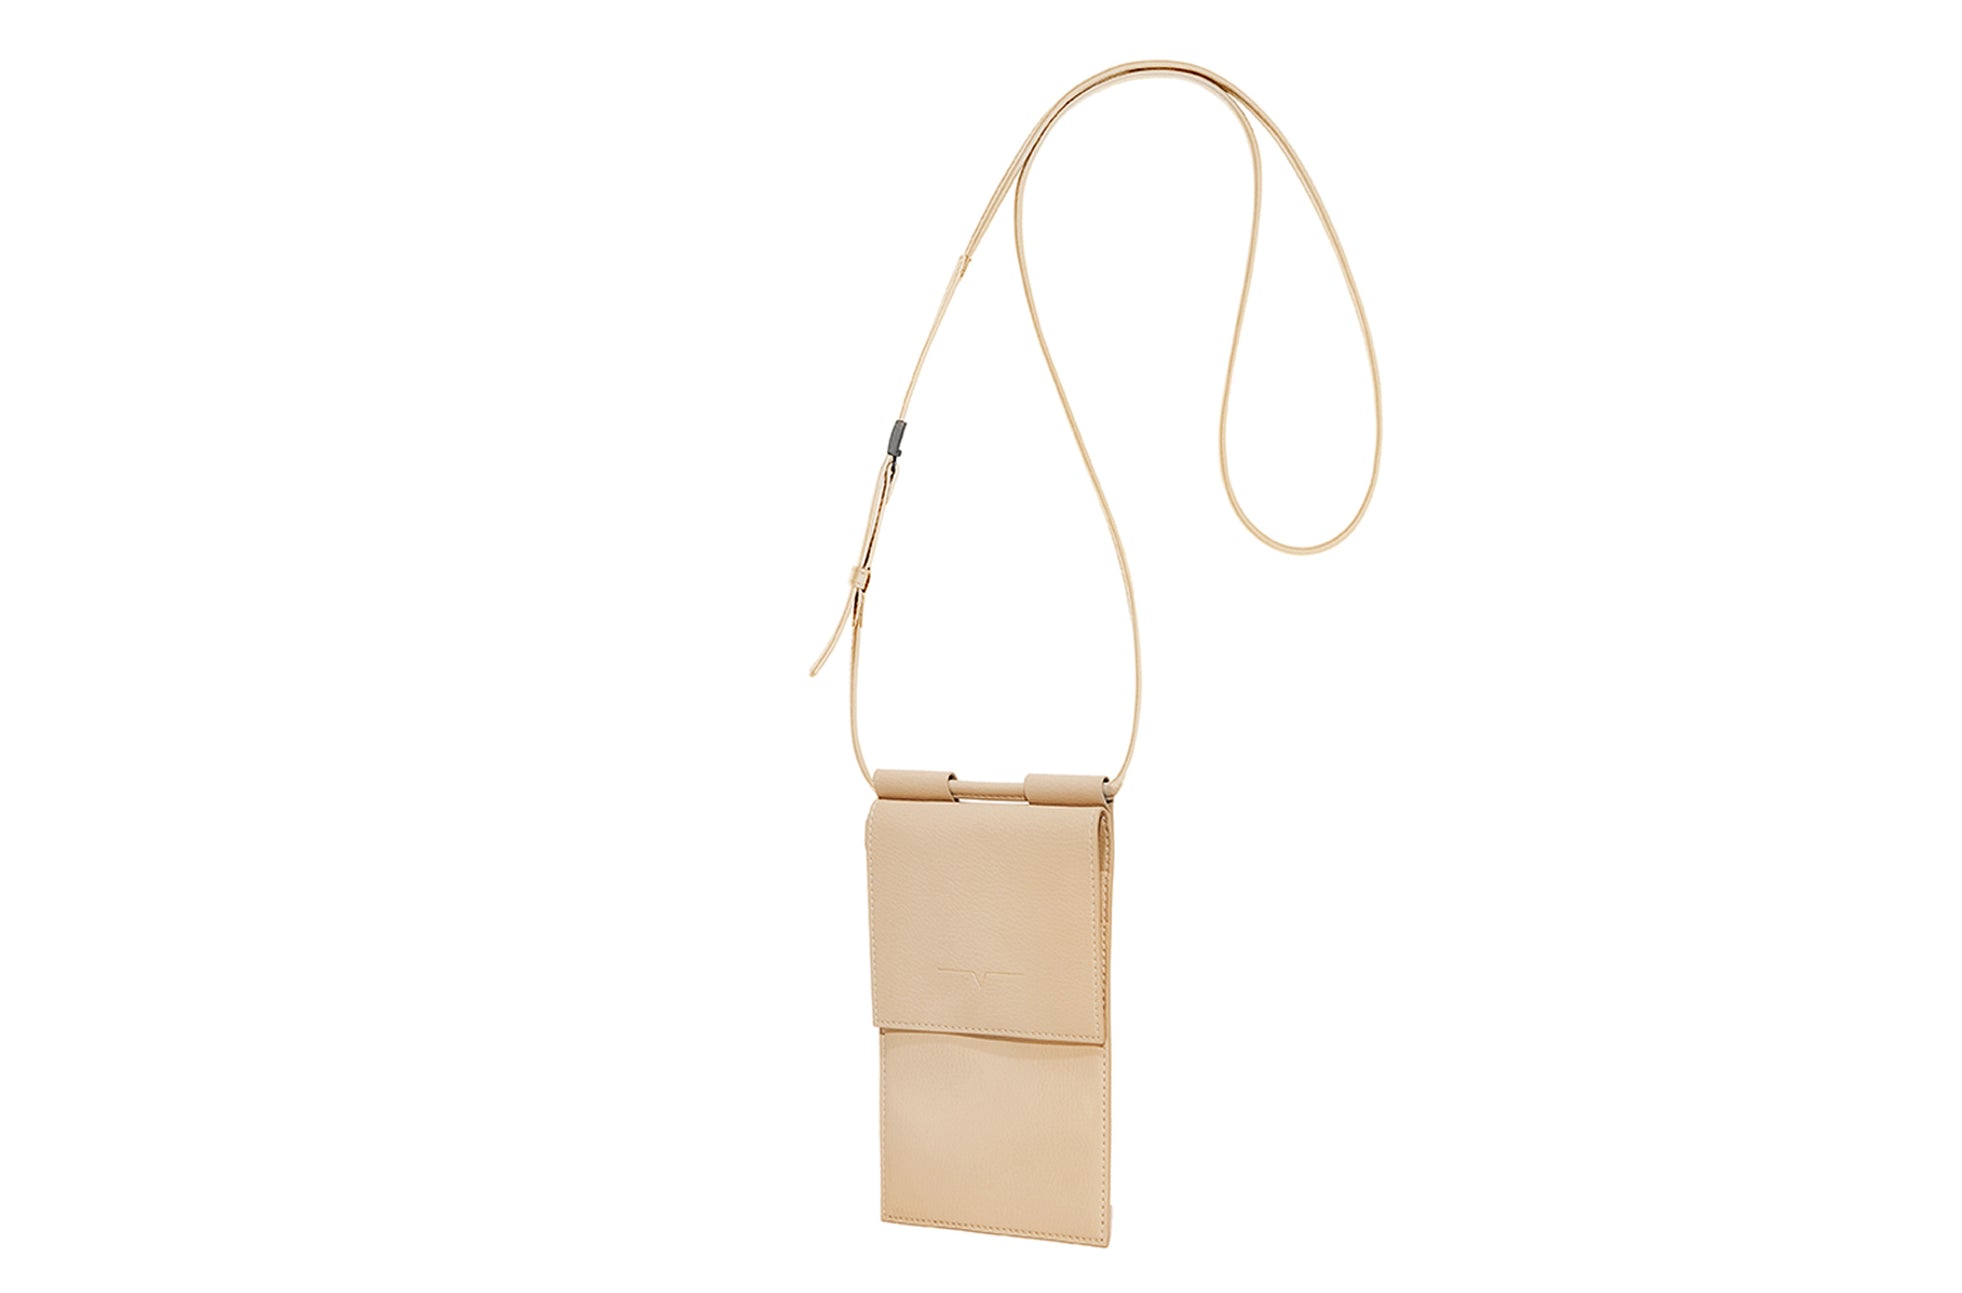 The Micro Bag in Technik-Leather in Sand image 4